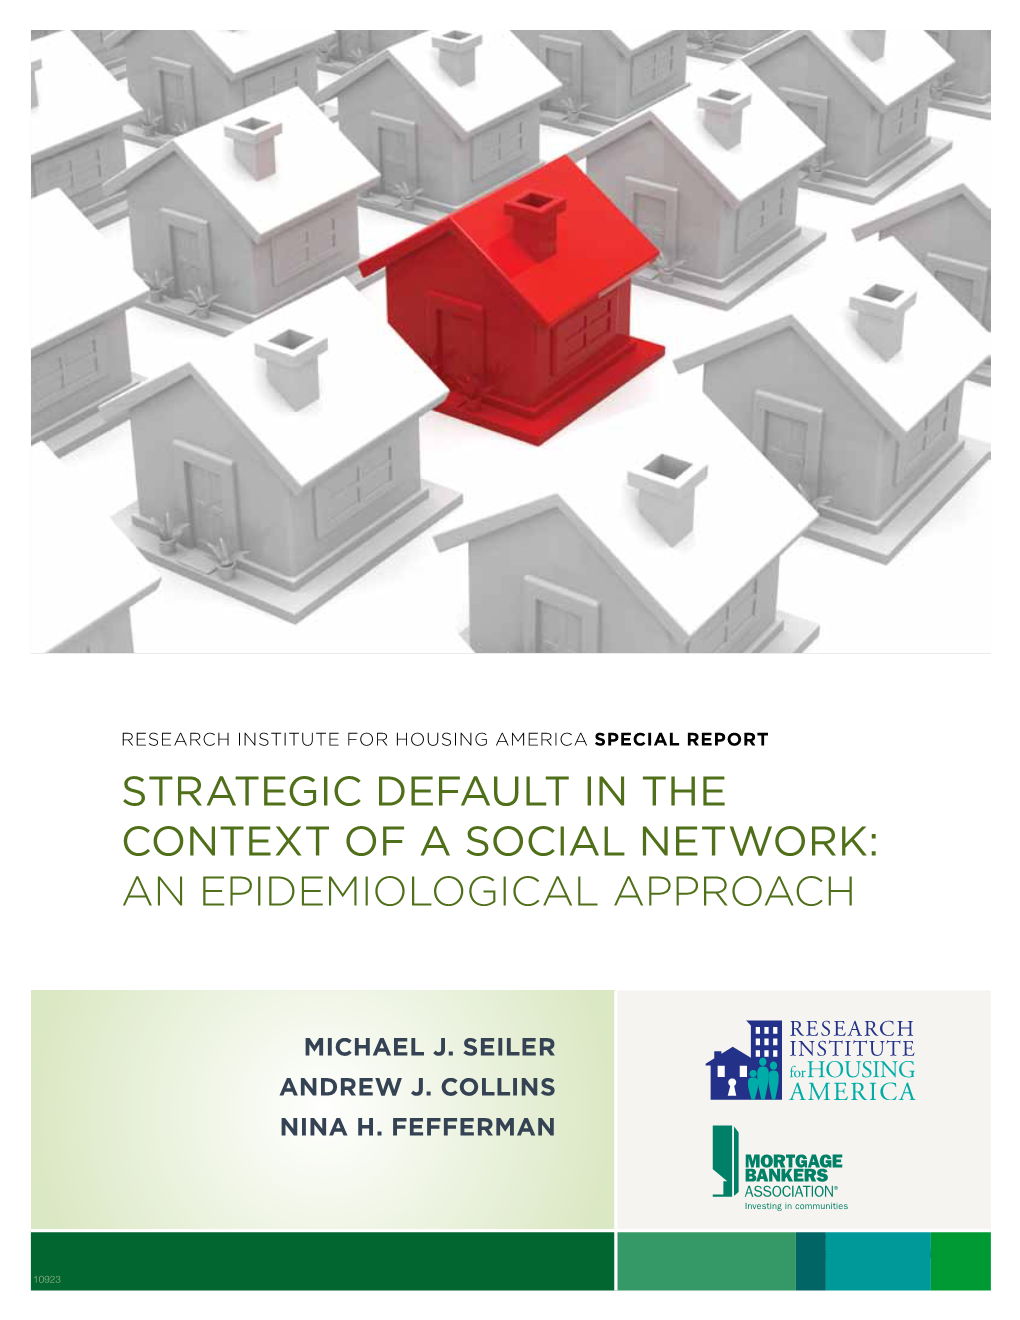 Strategic Default in the Context of a Social Network: an Epidemiological Approach